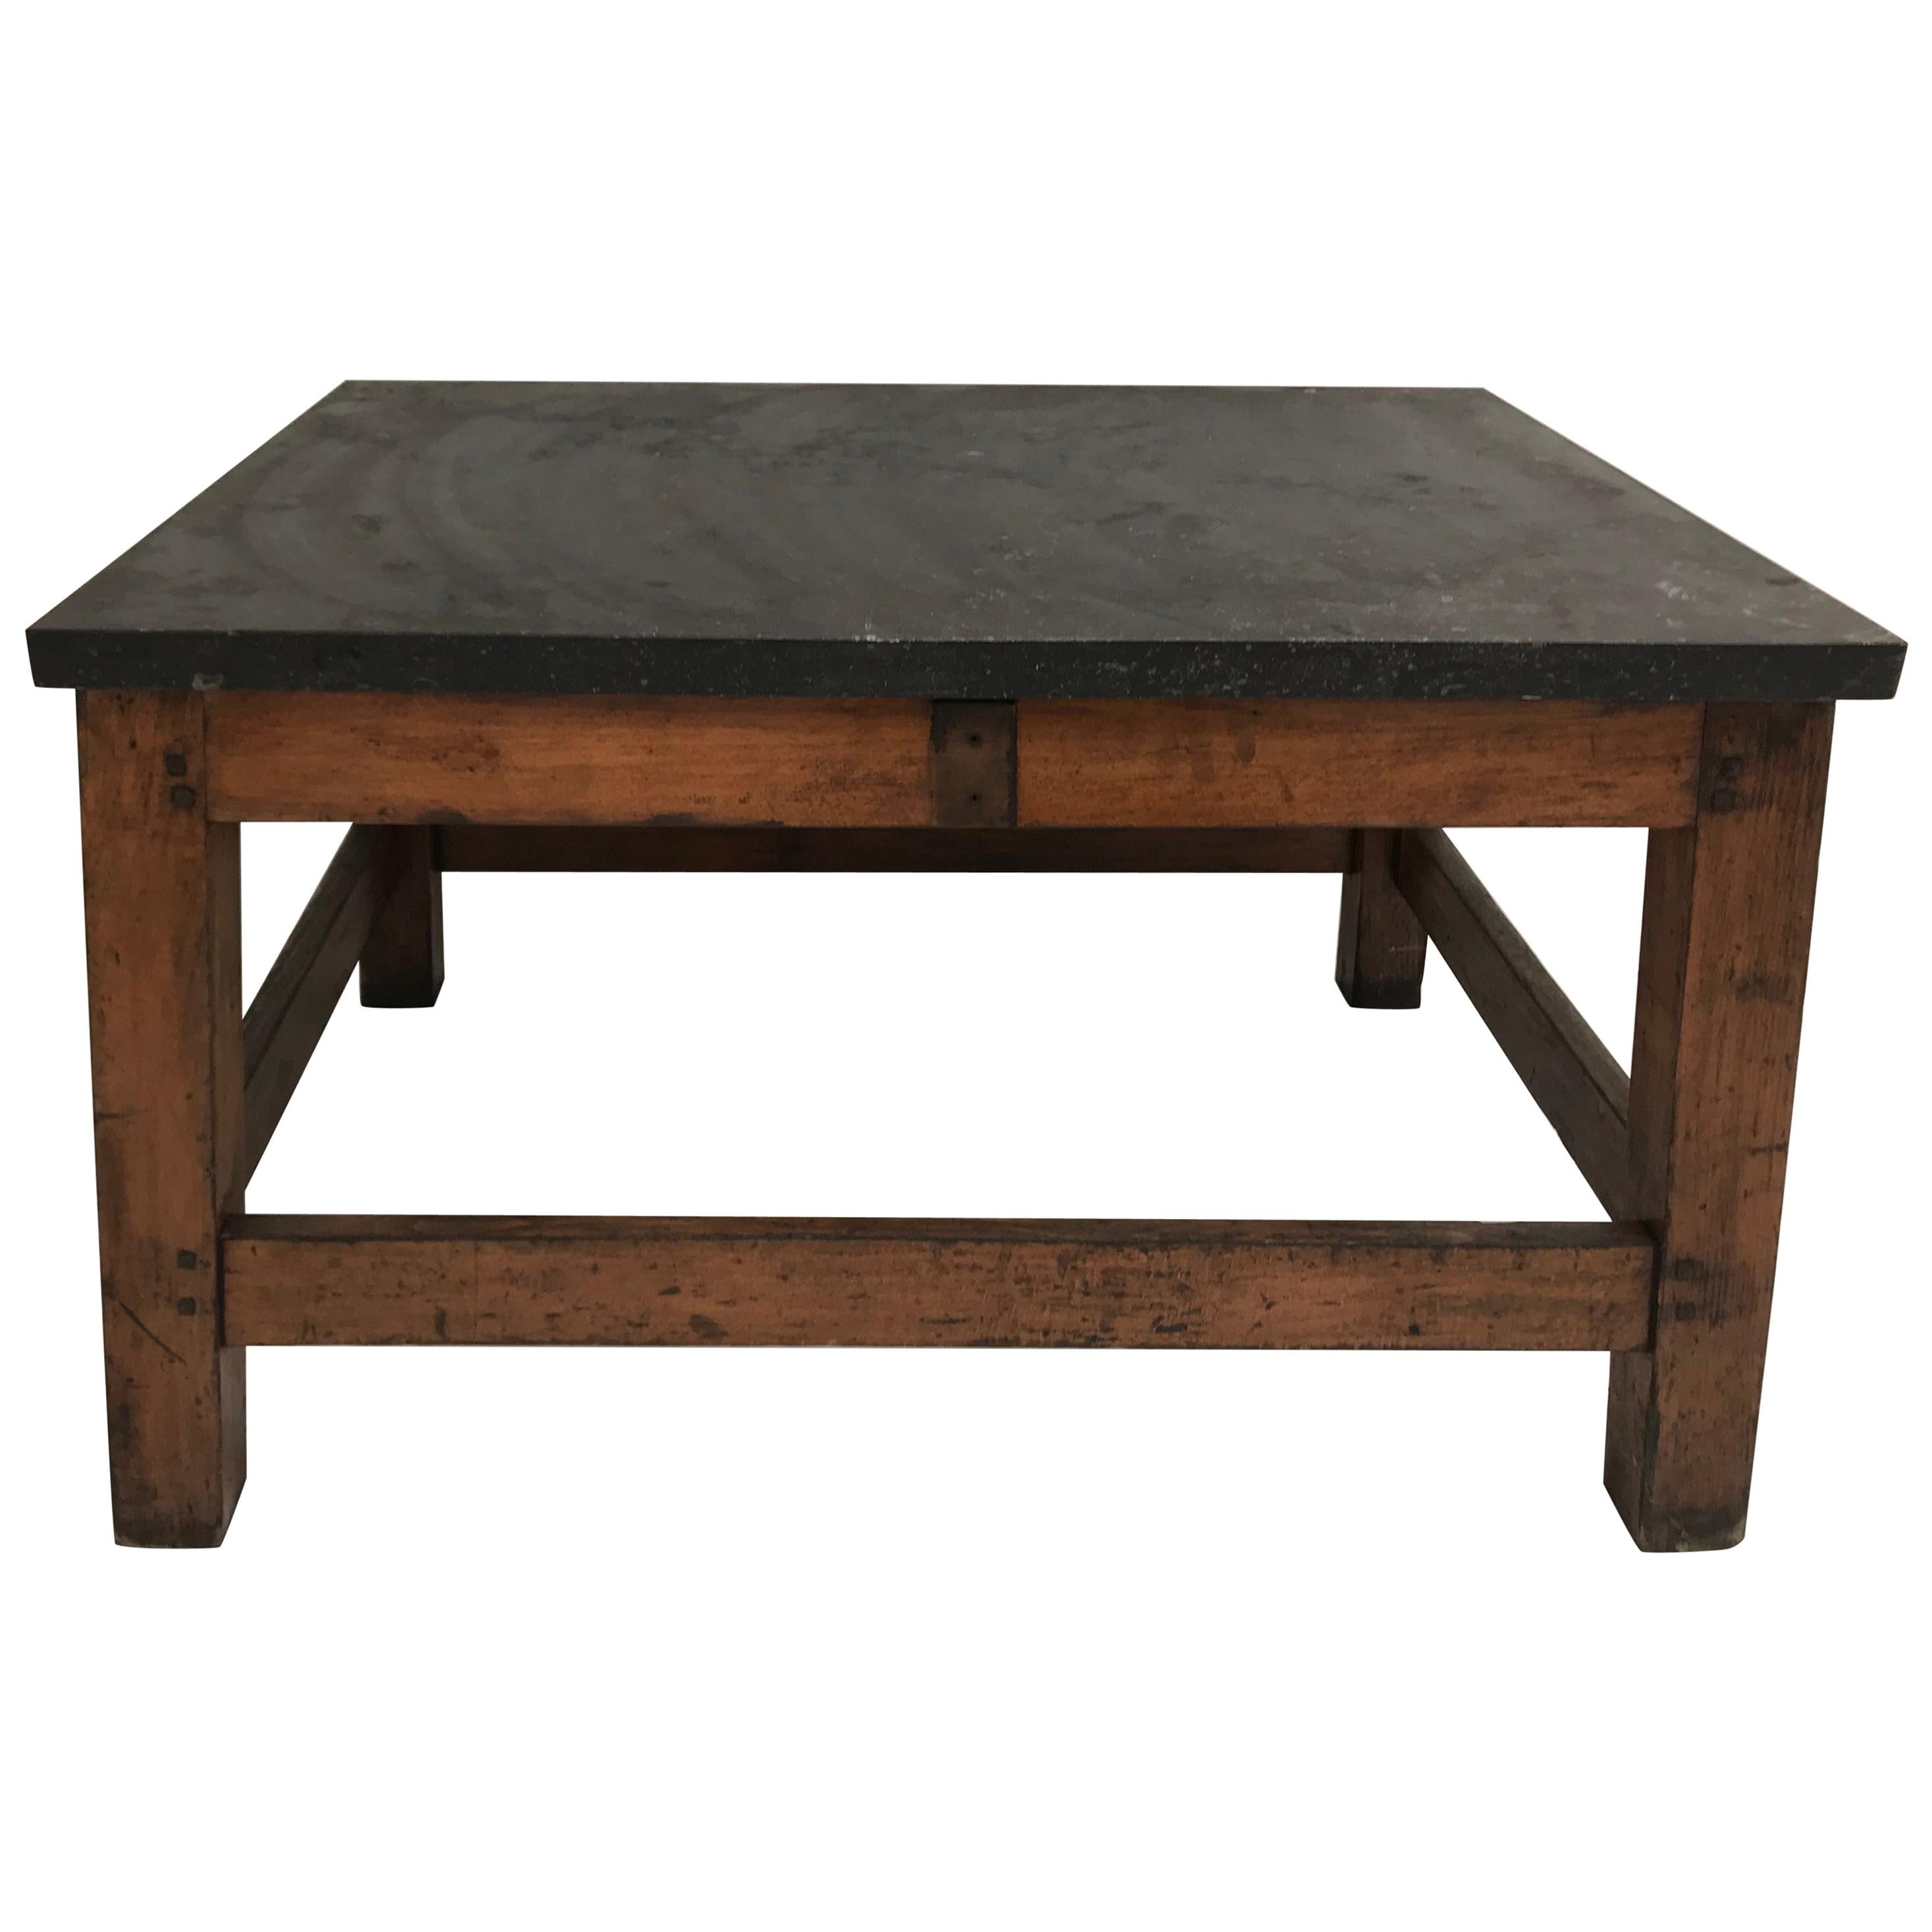 French Industrial Table with Bluestone Top